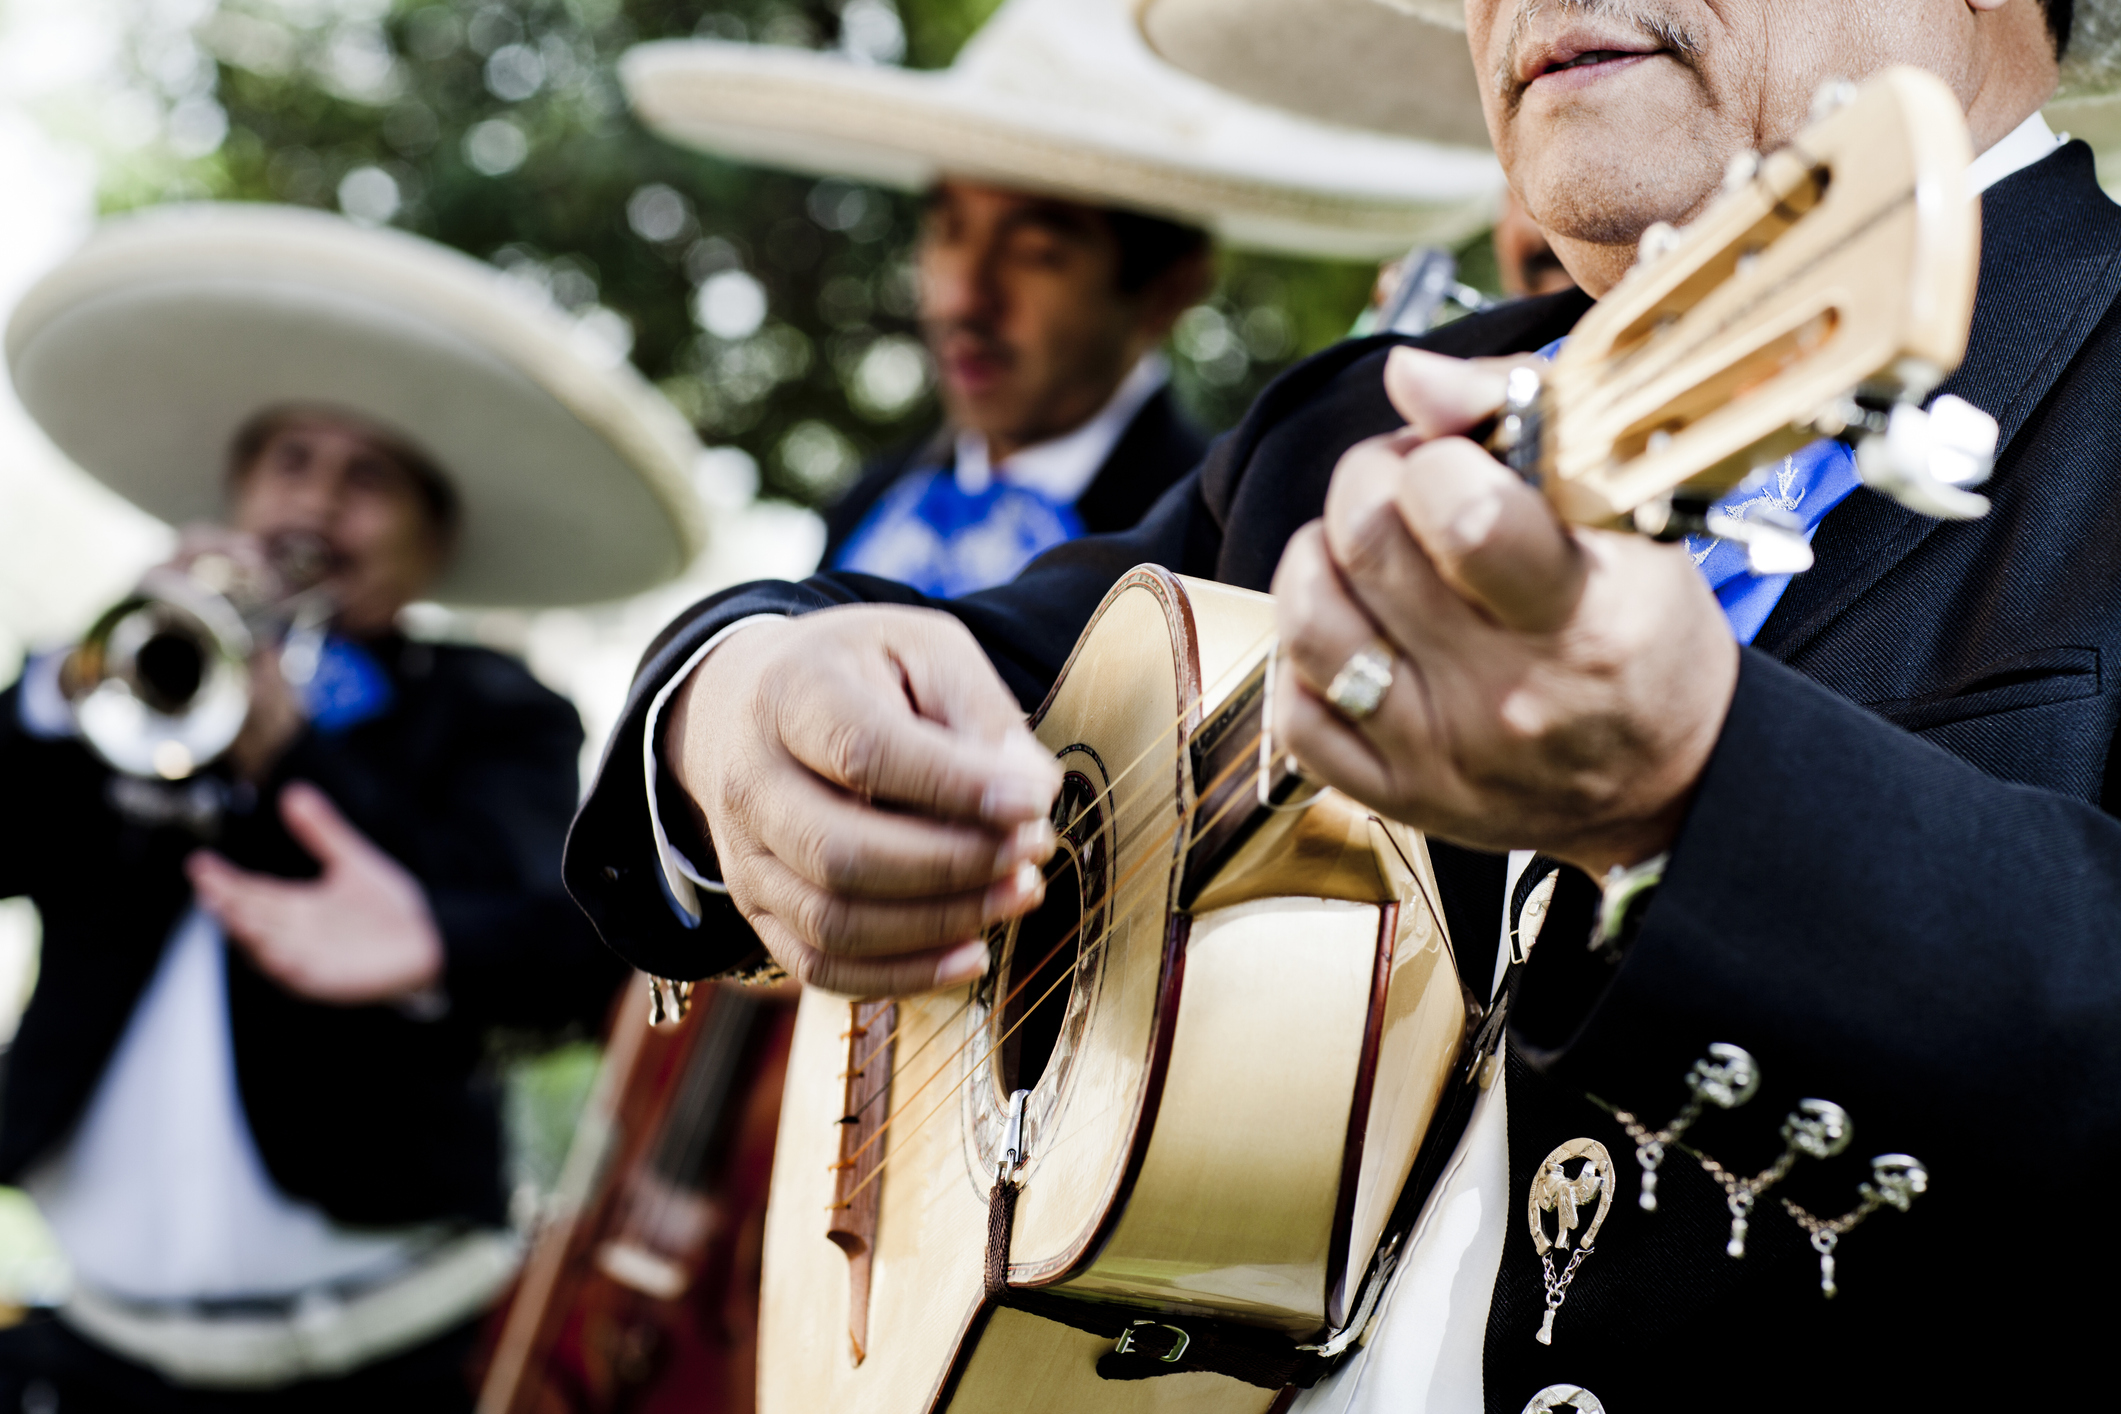 Mariachi Vargas will tour around the world during its 125th anniversary